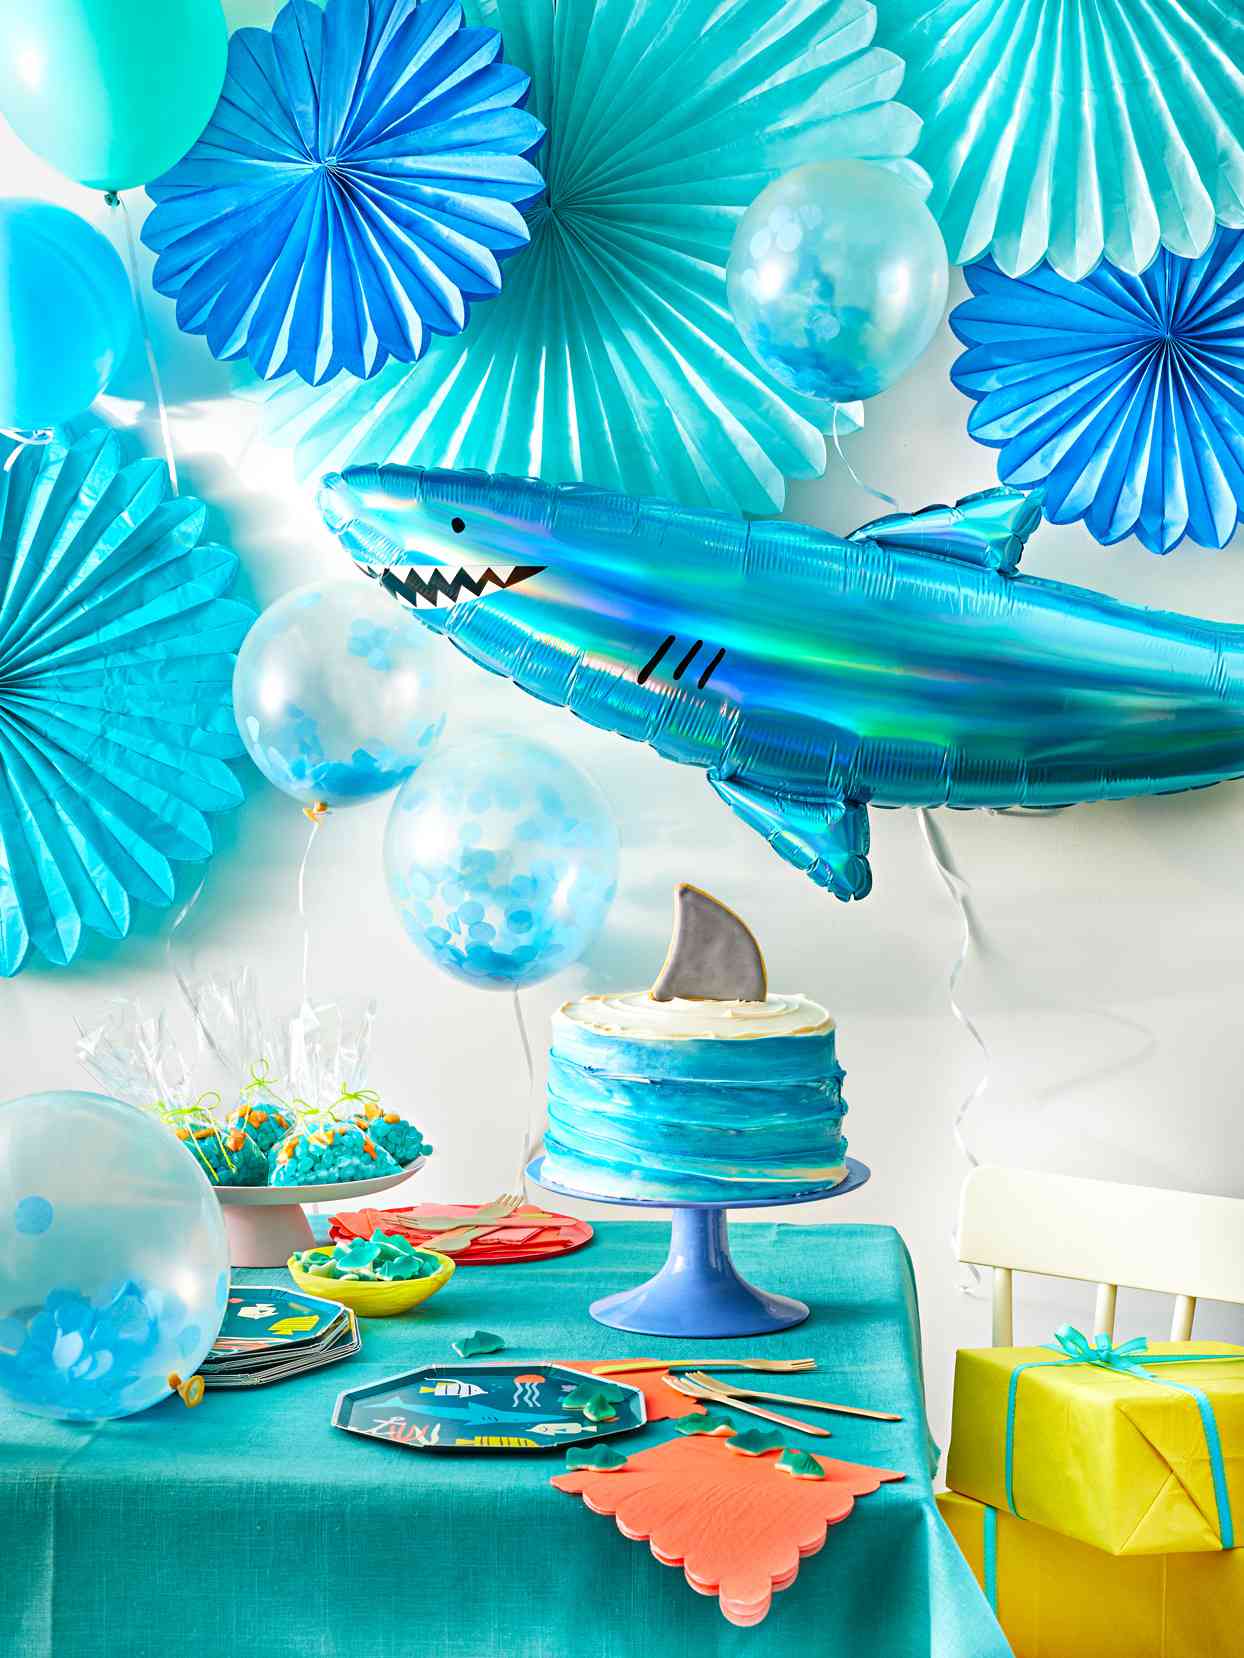 shark party decor cake and balloons